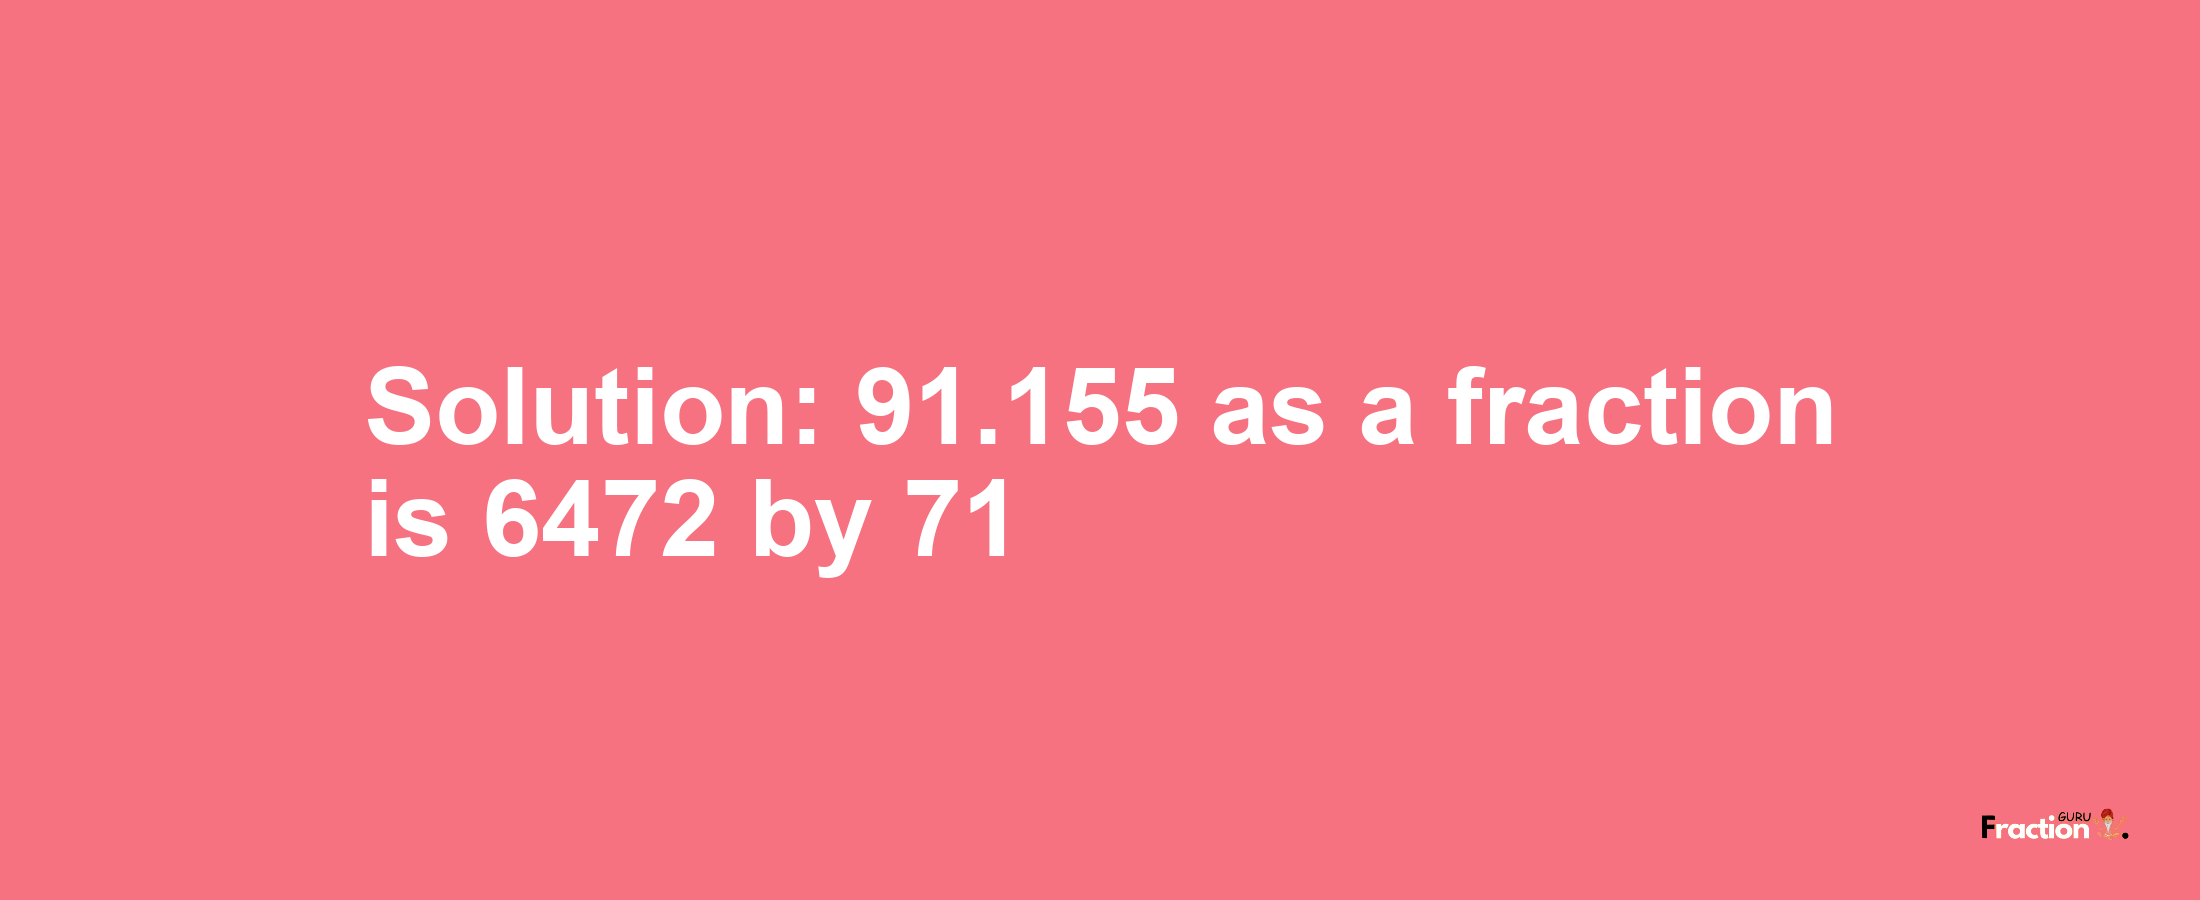 Solution:91.155 as a fraction is 6472/71